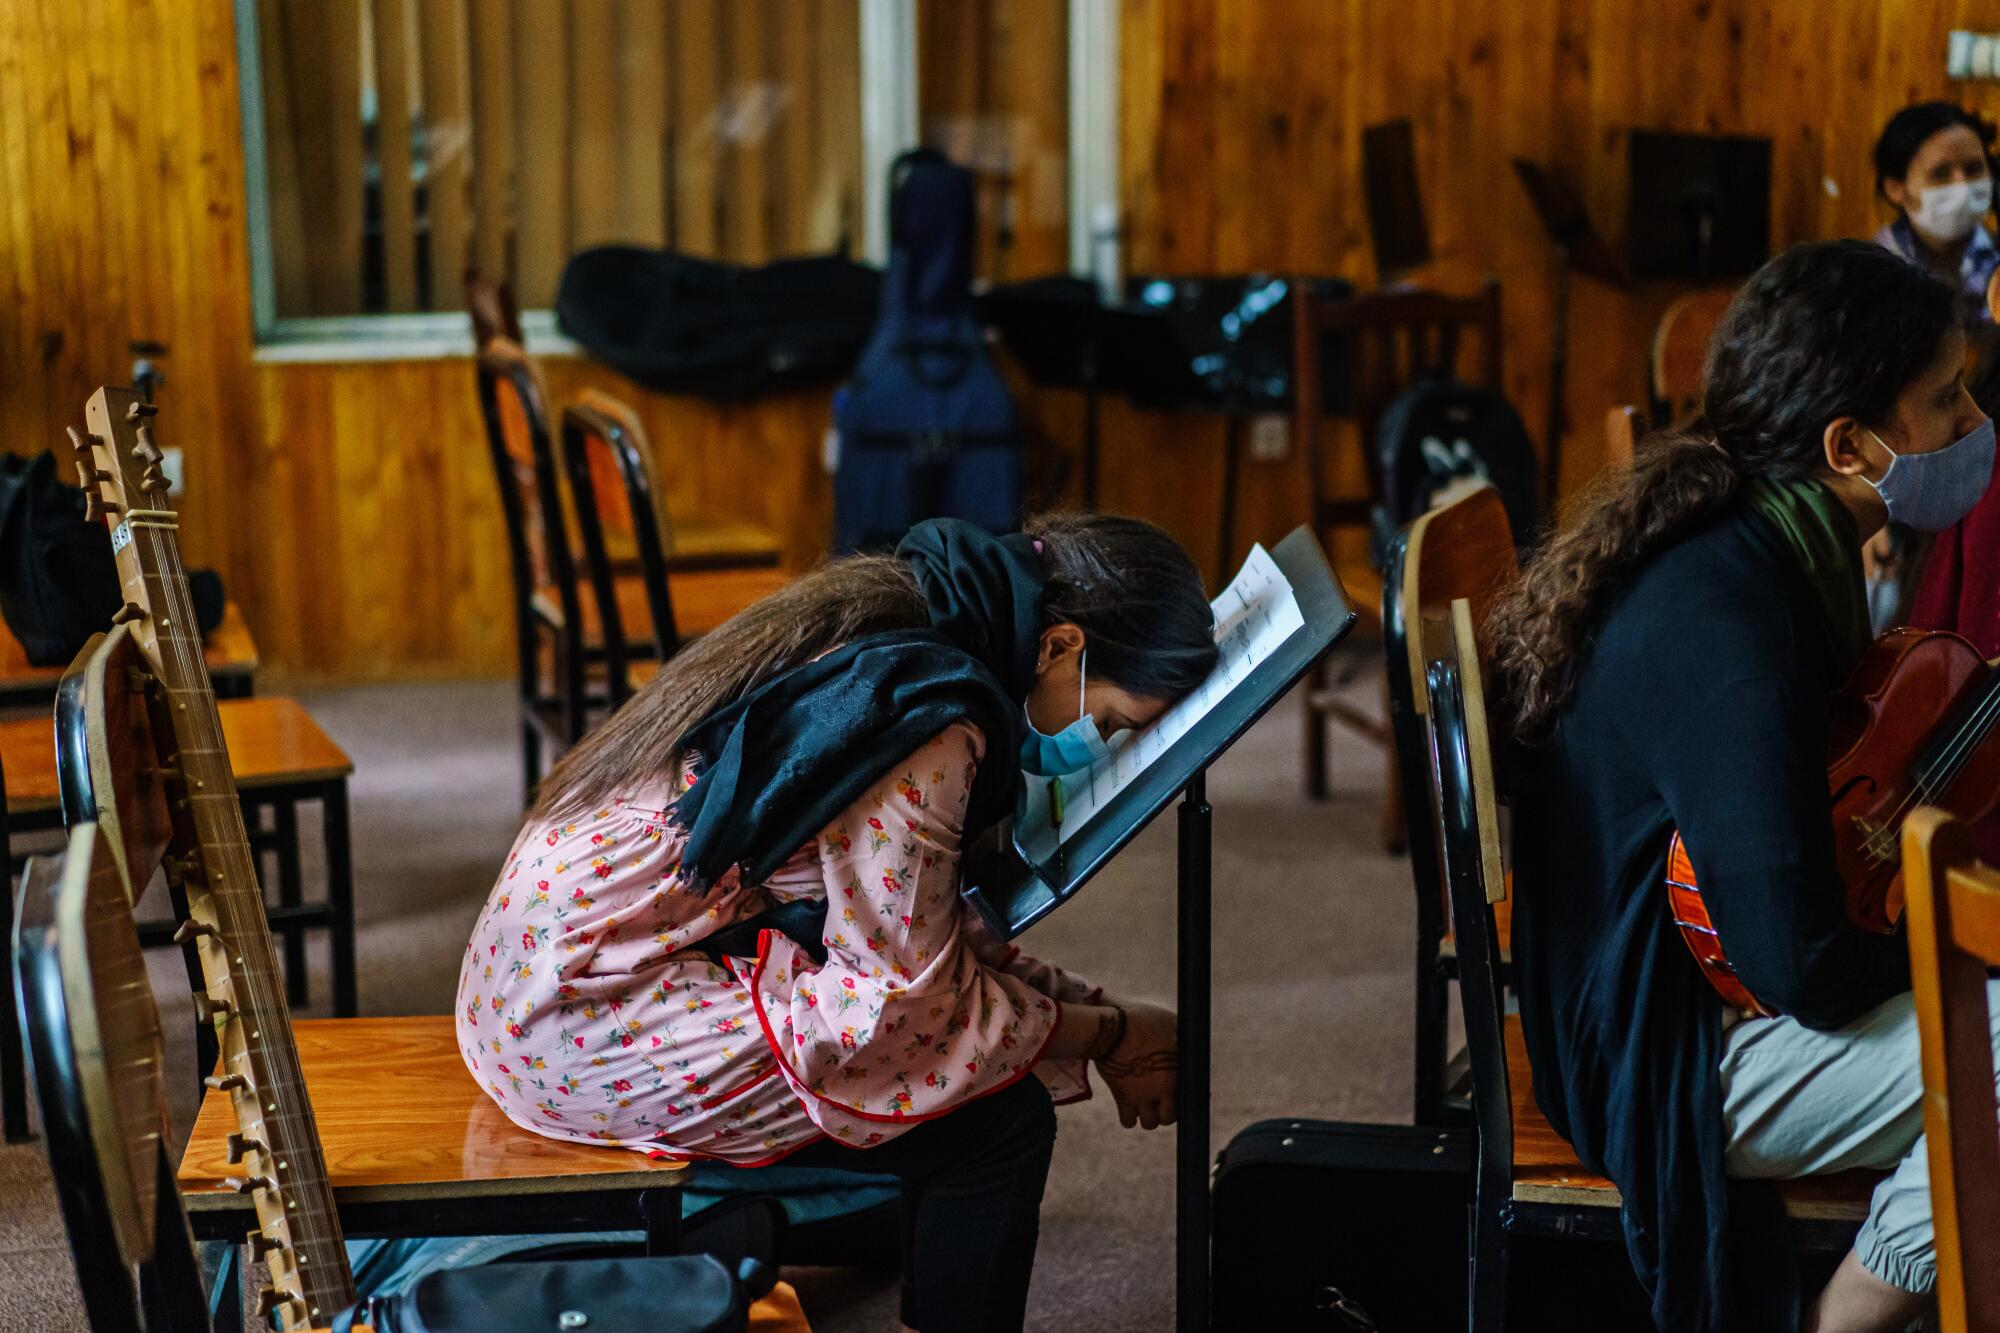 A girl rests her head on a music stand.